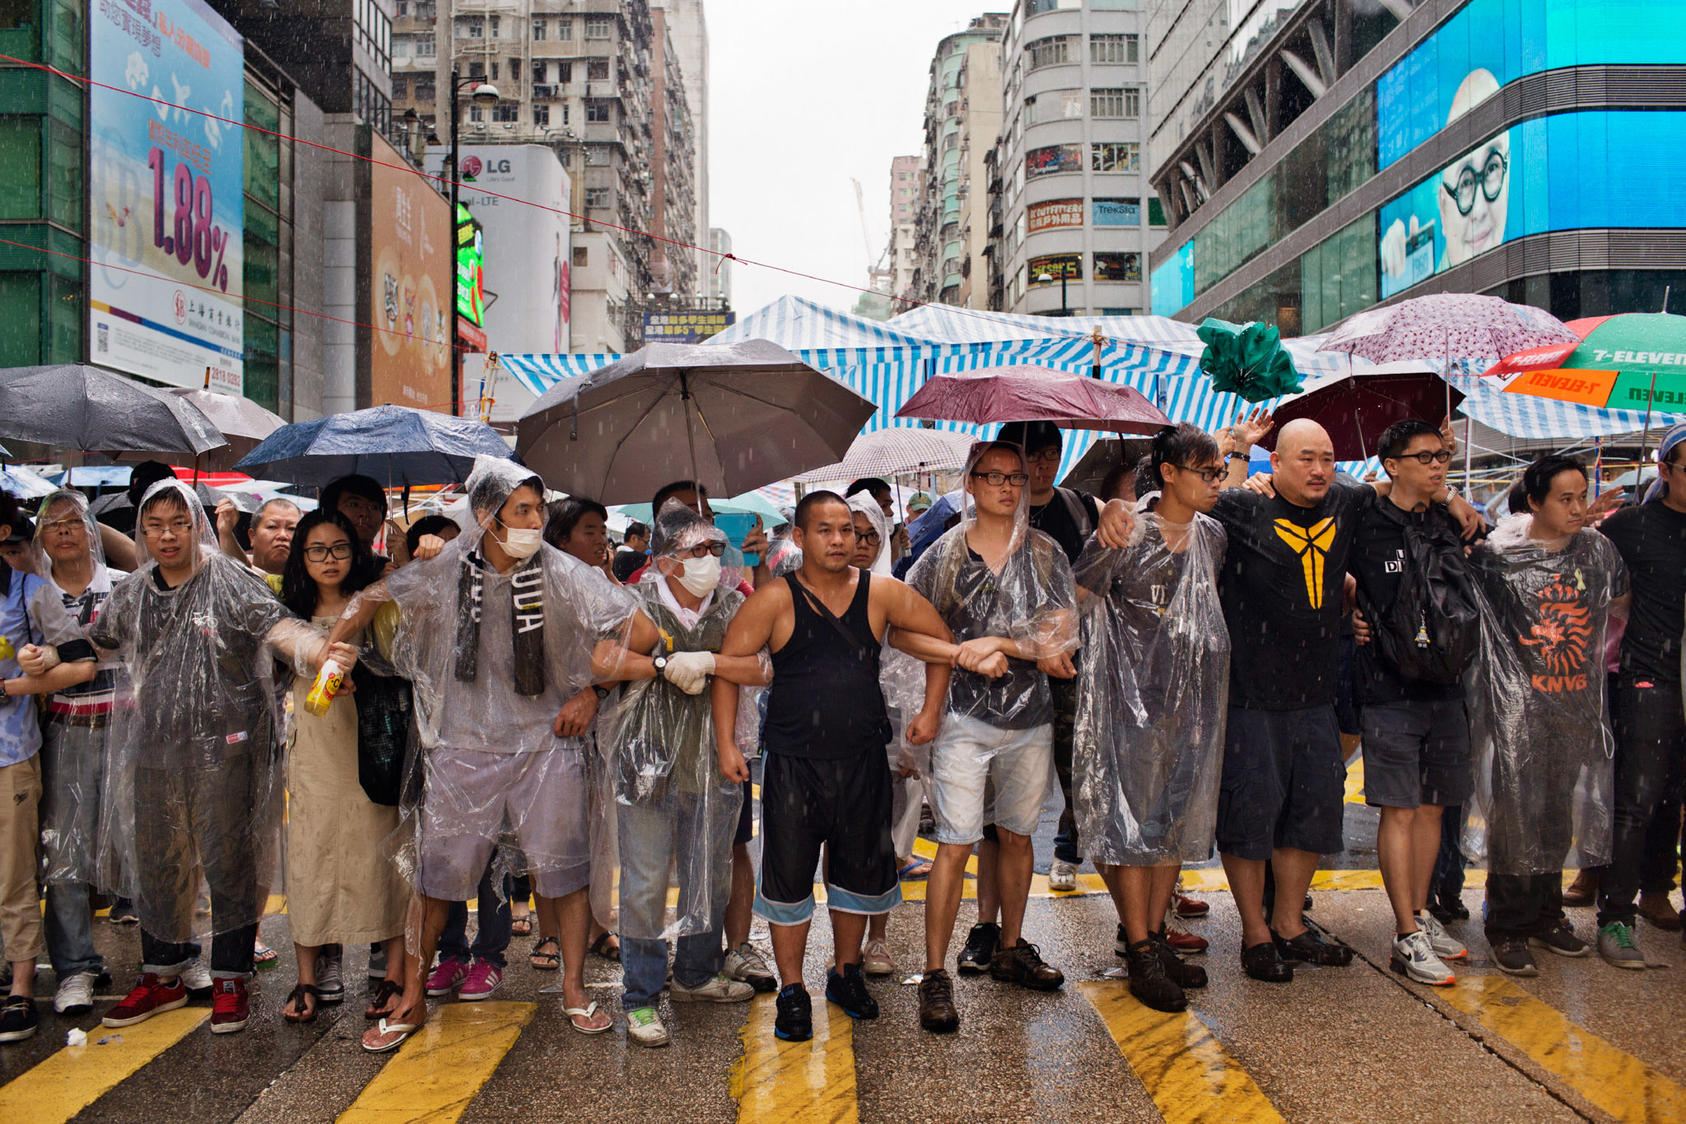 Pro-democracy protesters stand in a formation after coming under assault in the Mong Kok neighborhood of Hong Kong, Oct. 3, 2014. Demonstrators in two parts of Hong Kong came under attack on Friday from men seeking to break apart their encampments, surrounding them and tearing down their tents.